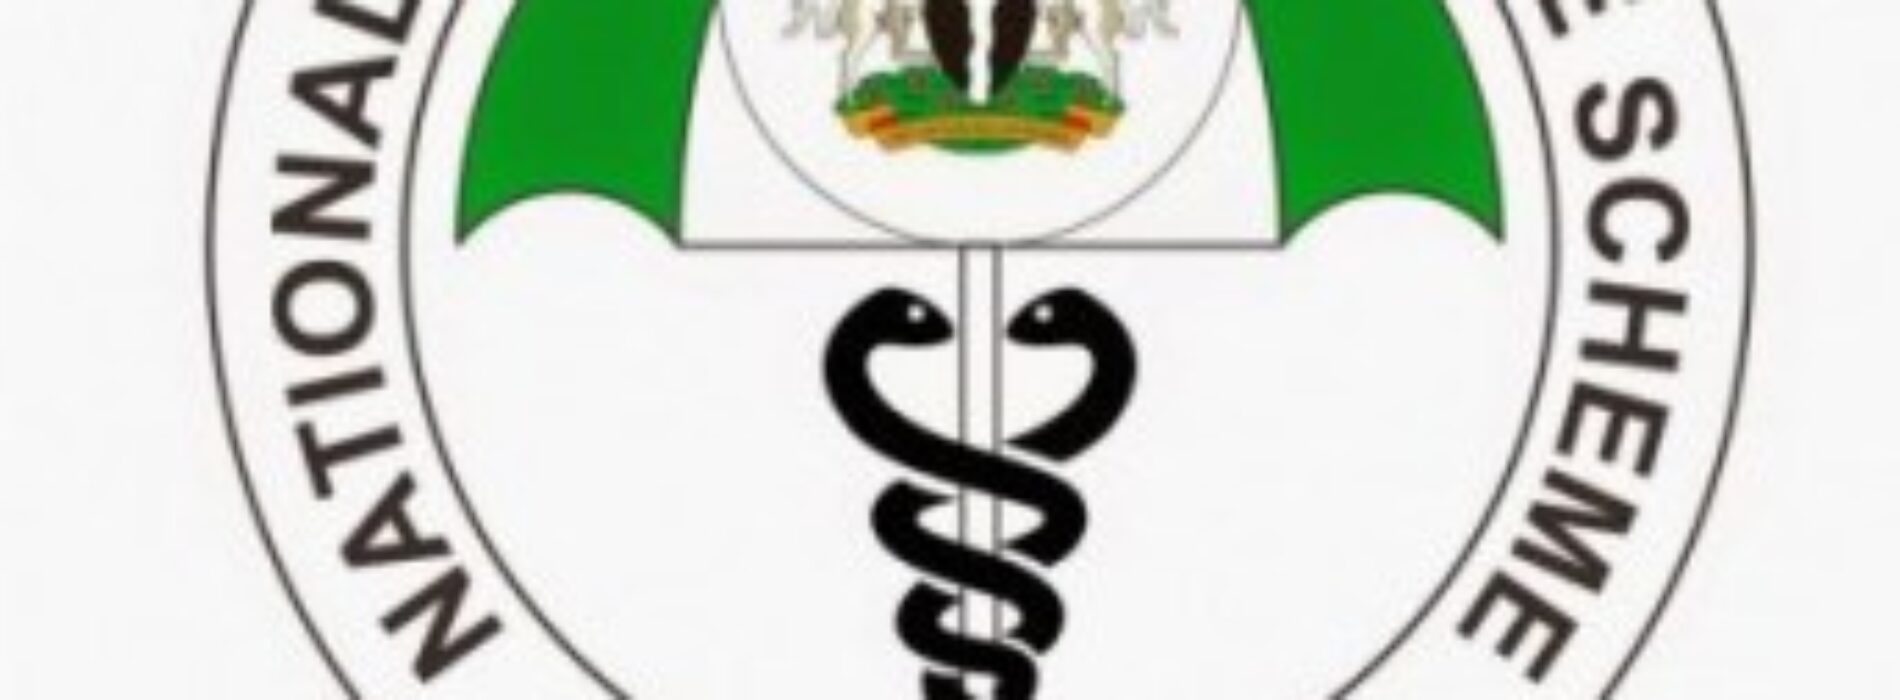 NHIS launches initiative to subsidize cancer drugs